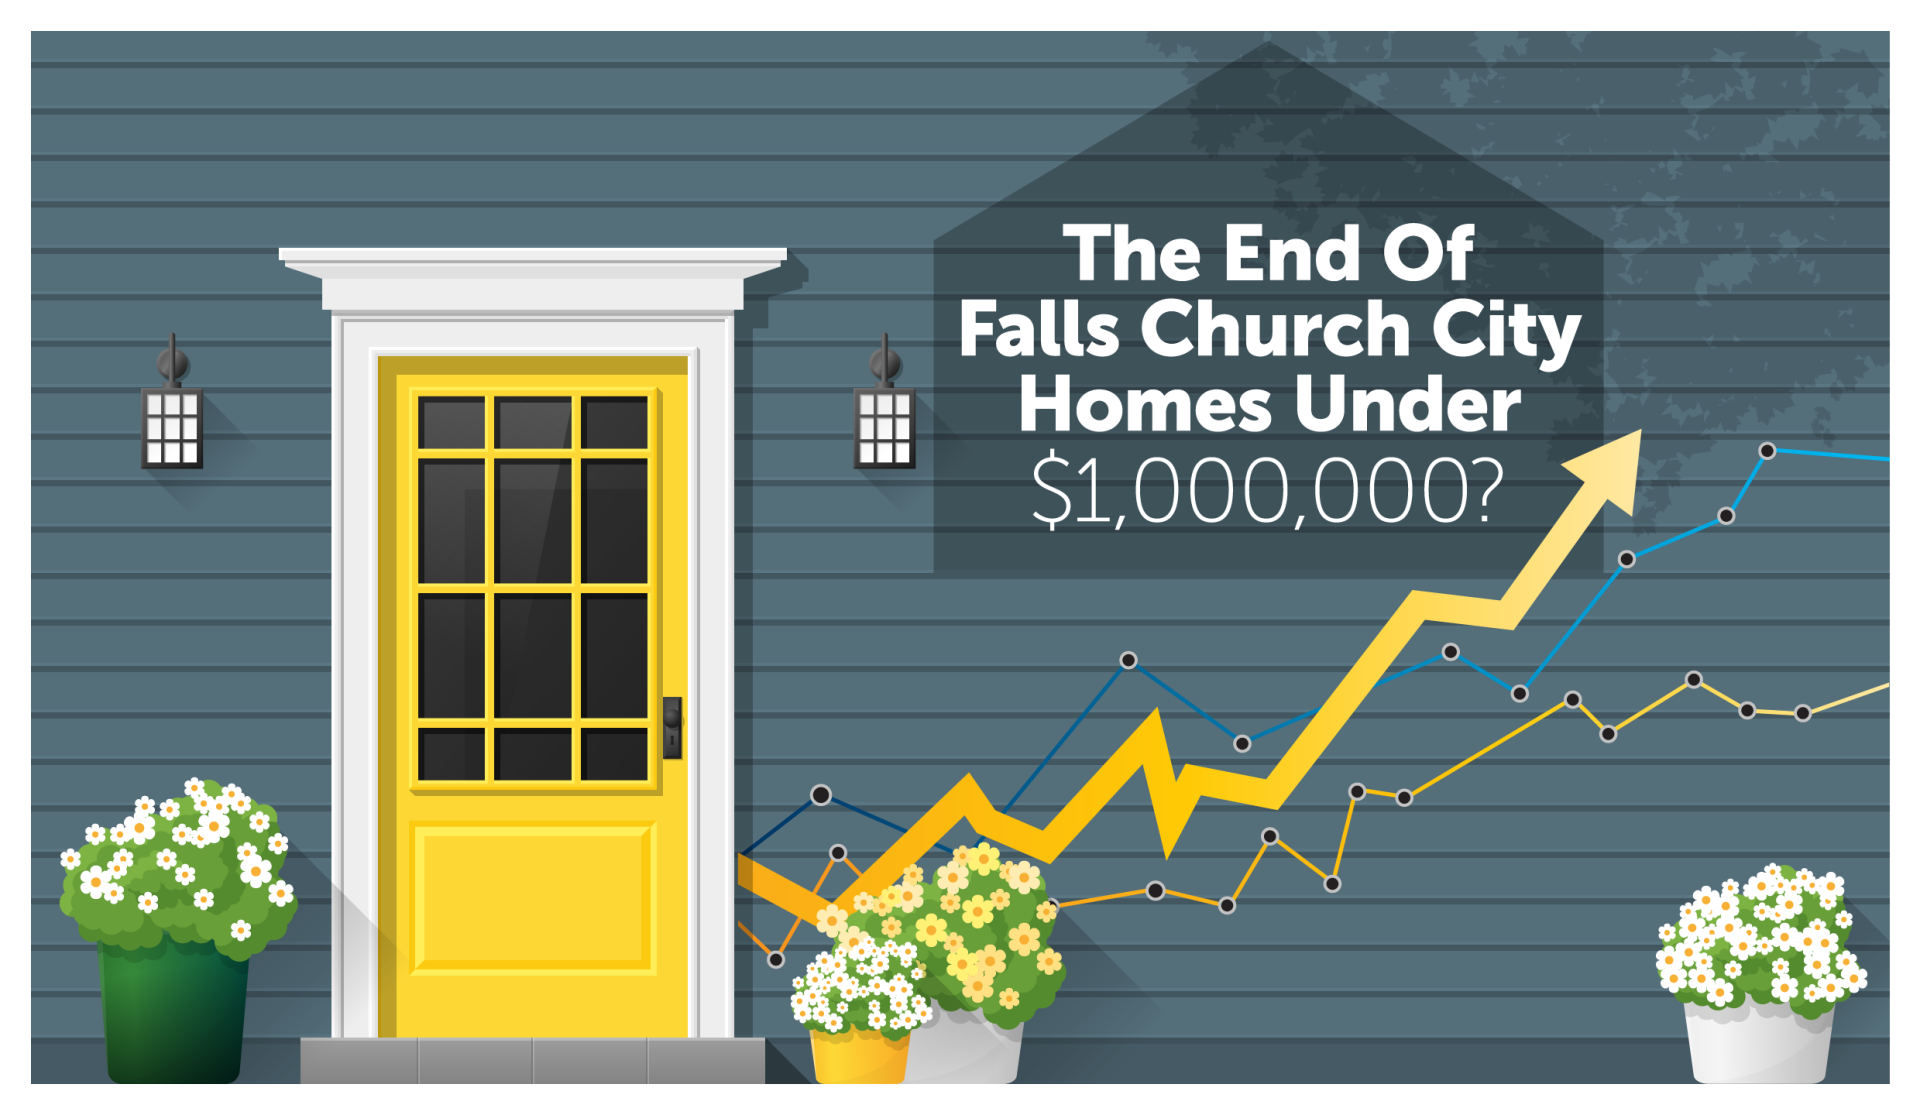 The End of Single Family Homes Under $1m in FCC?